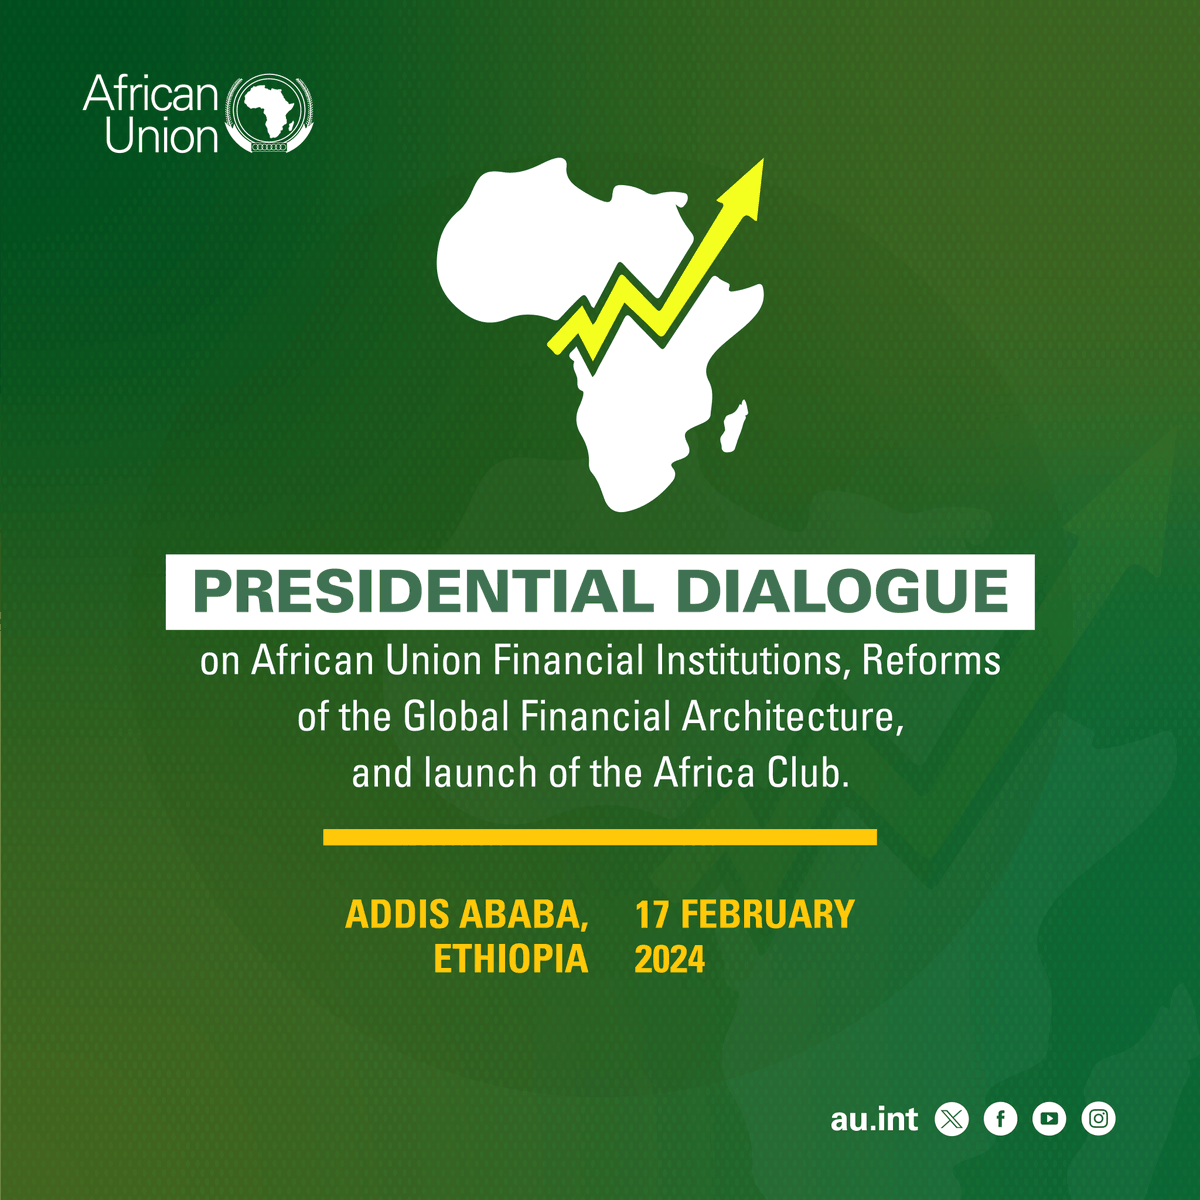 Presidential Dialogue on African Financial Institutions. 📆17 Feb 2024 ⏰7:30AM EAT Heads of State and Govt will convene for a dialogue on African Financial Institutions & Global Financial Architecture Reforms. 📍AU HQ 🖥️ow.ly/p1BP50QBR4k Details🌐ow.ly/9ORi50QBR4l